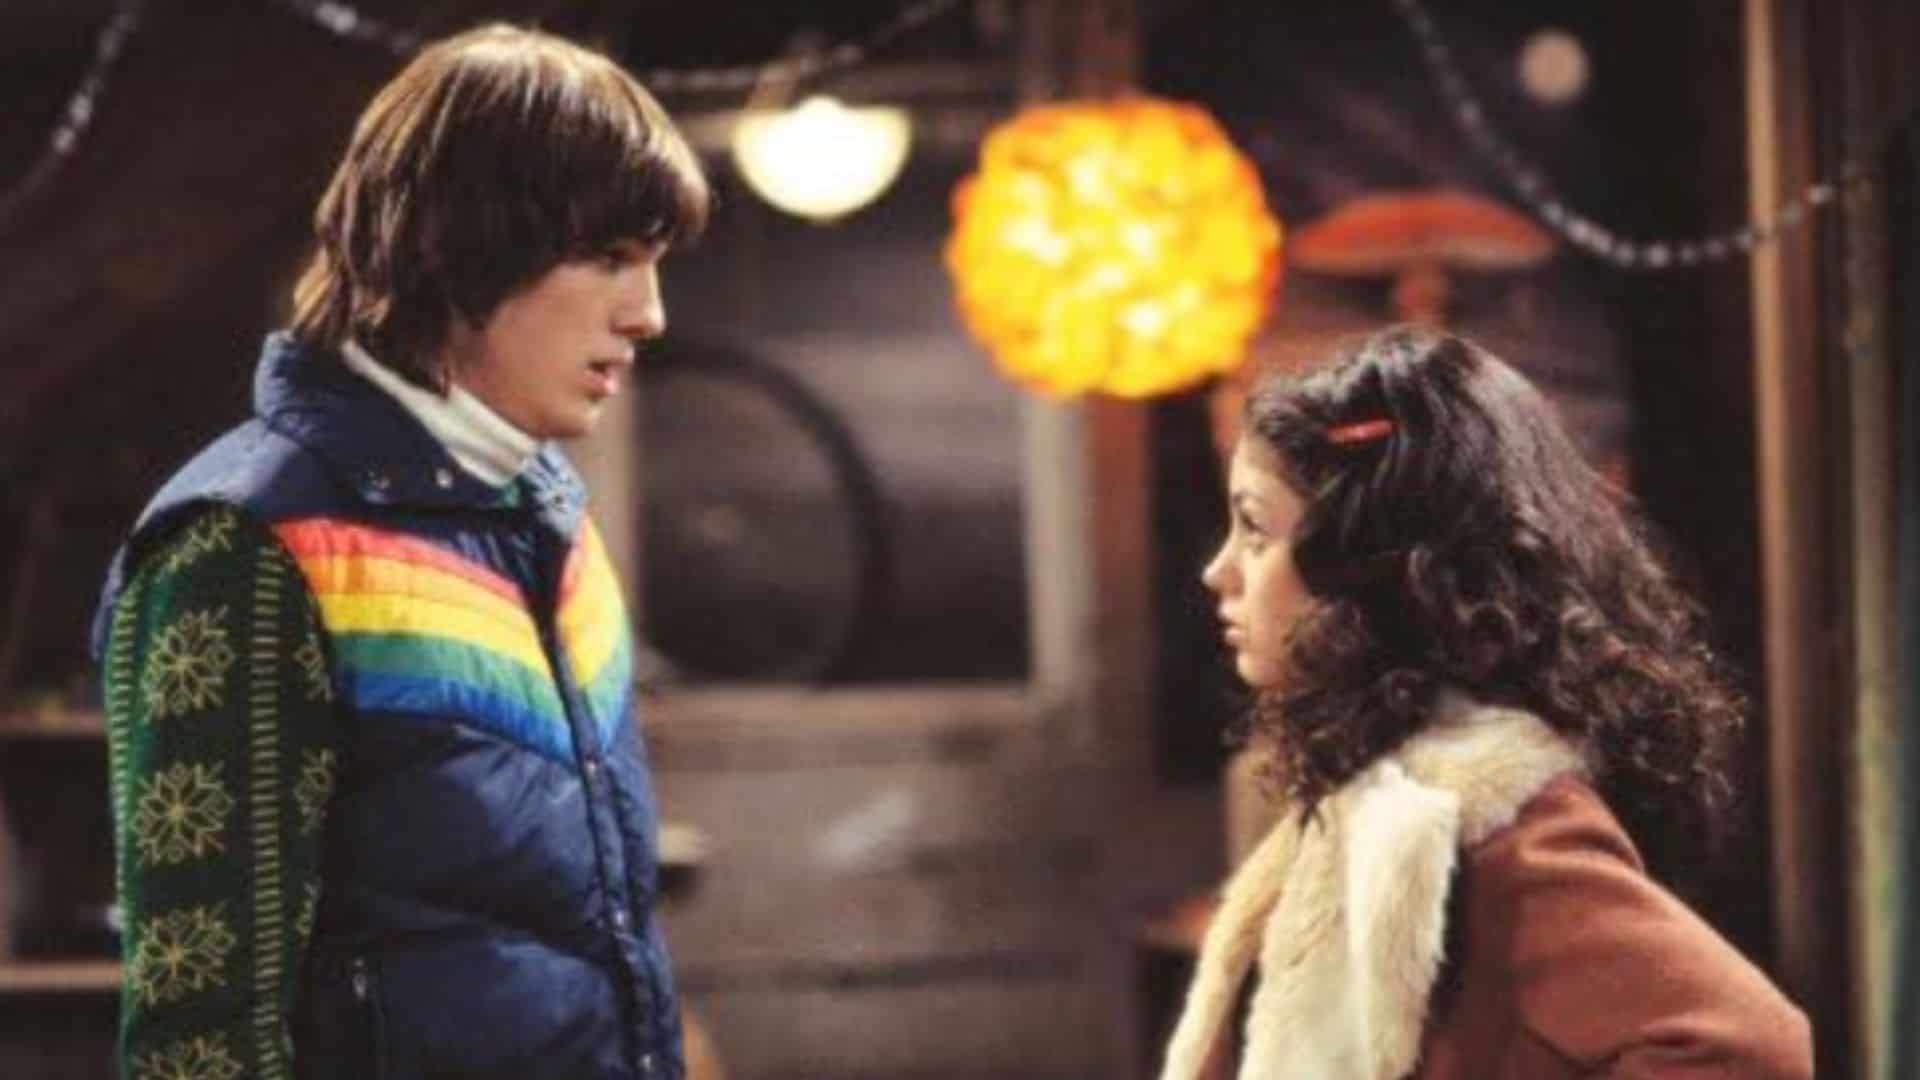 Ashton Kutcher and Mila Kunis arguing in this image from The Carsey-Werner Company